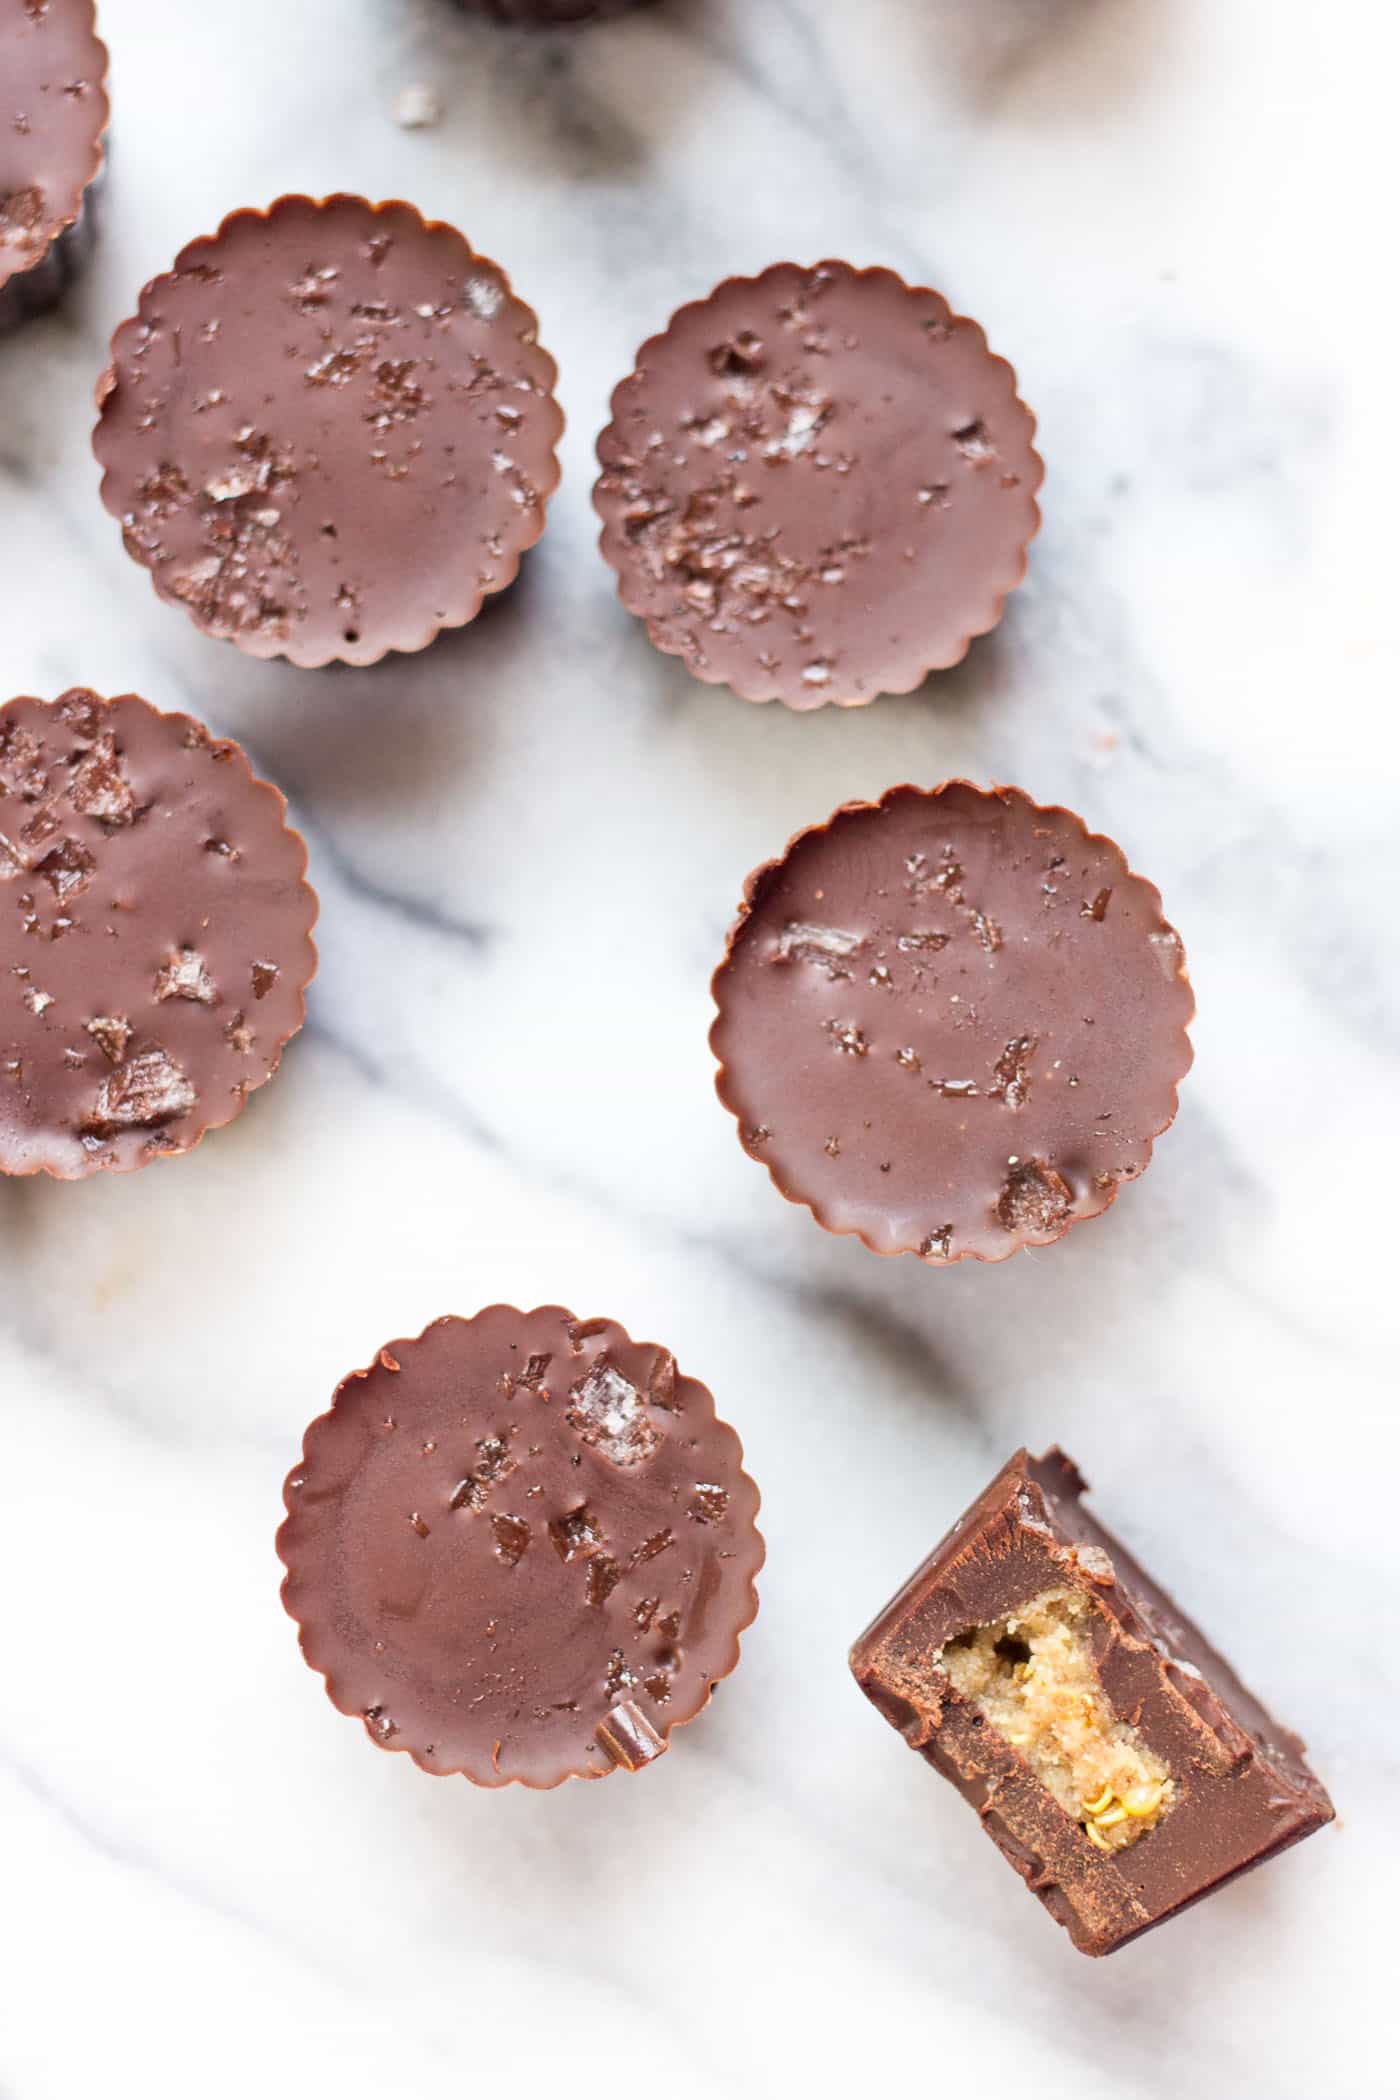 These almond butter cups are not only VEGAN, they're also super simple to make and require just SIX ingredients!!